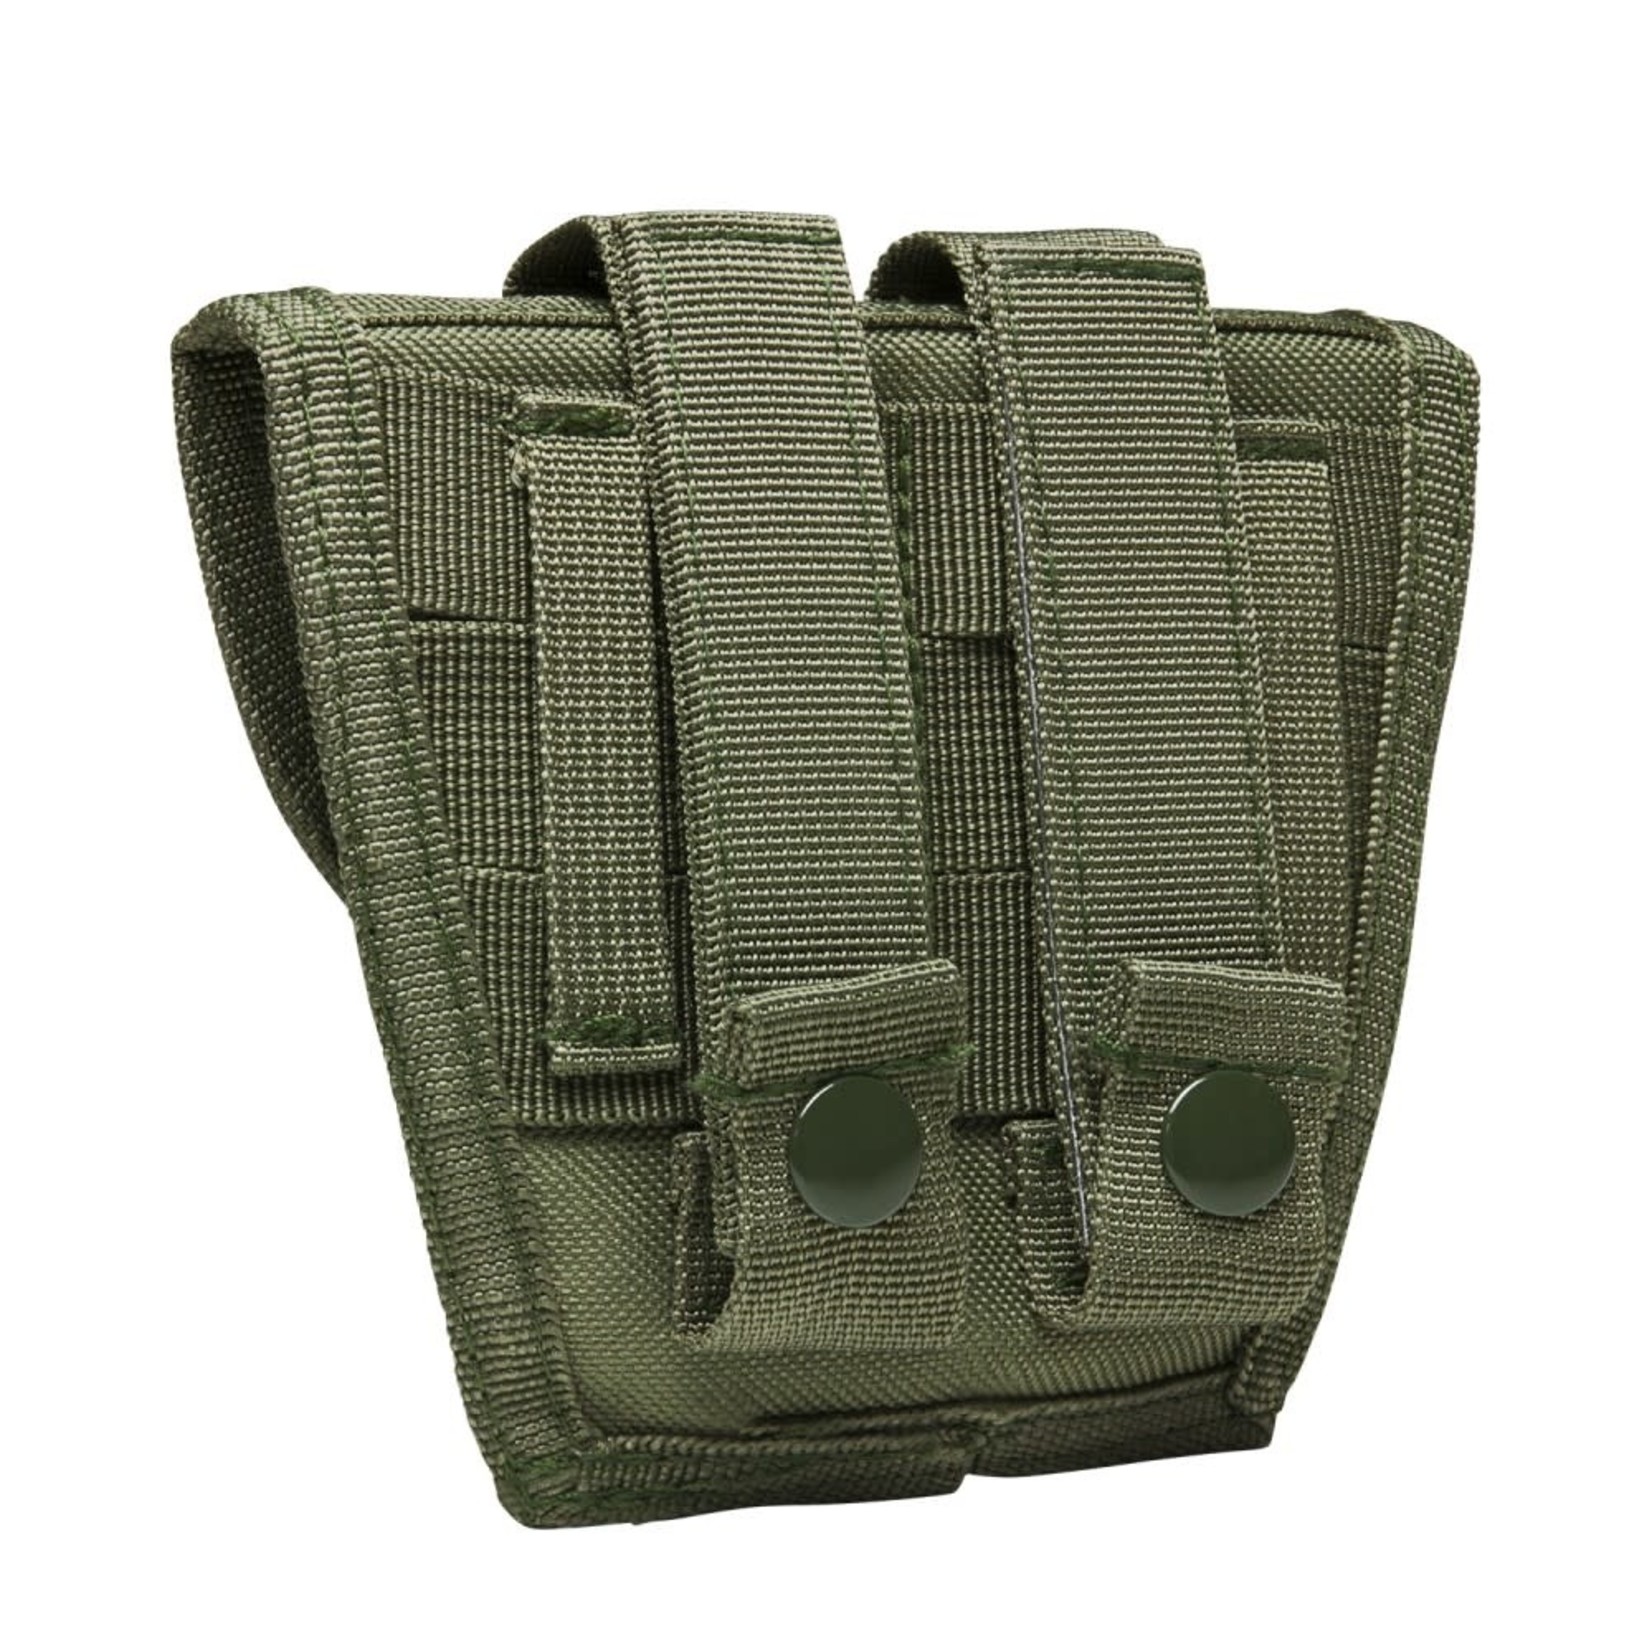 NcStar/Vism Vism MOLLE Handcuff Pouch -  Olive Drab